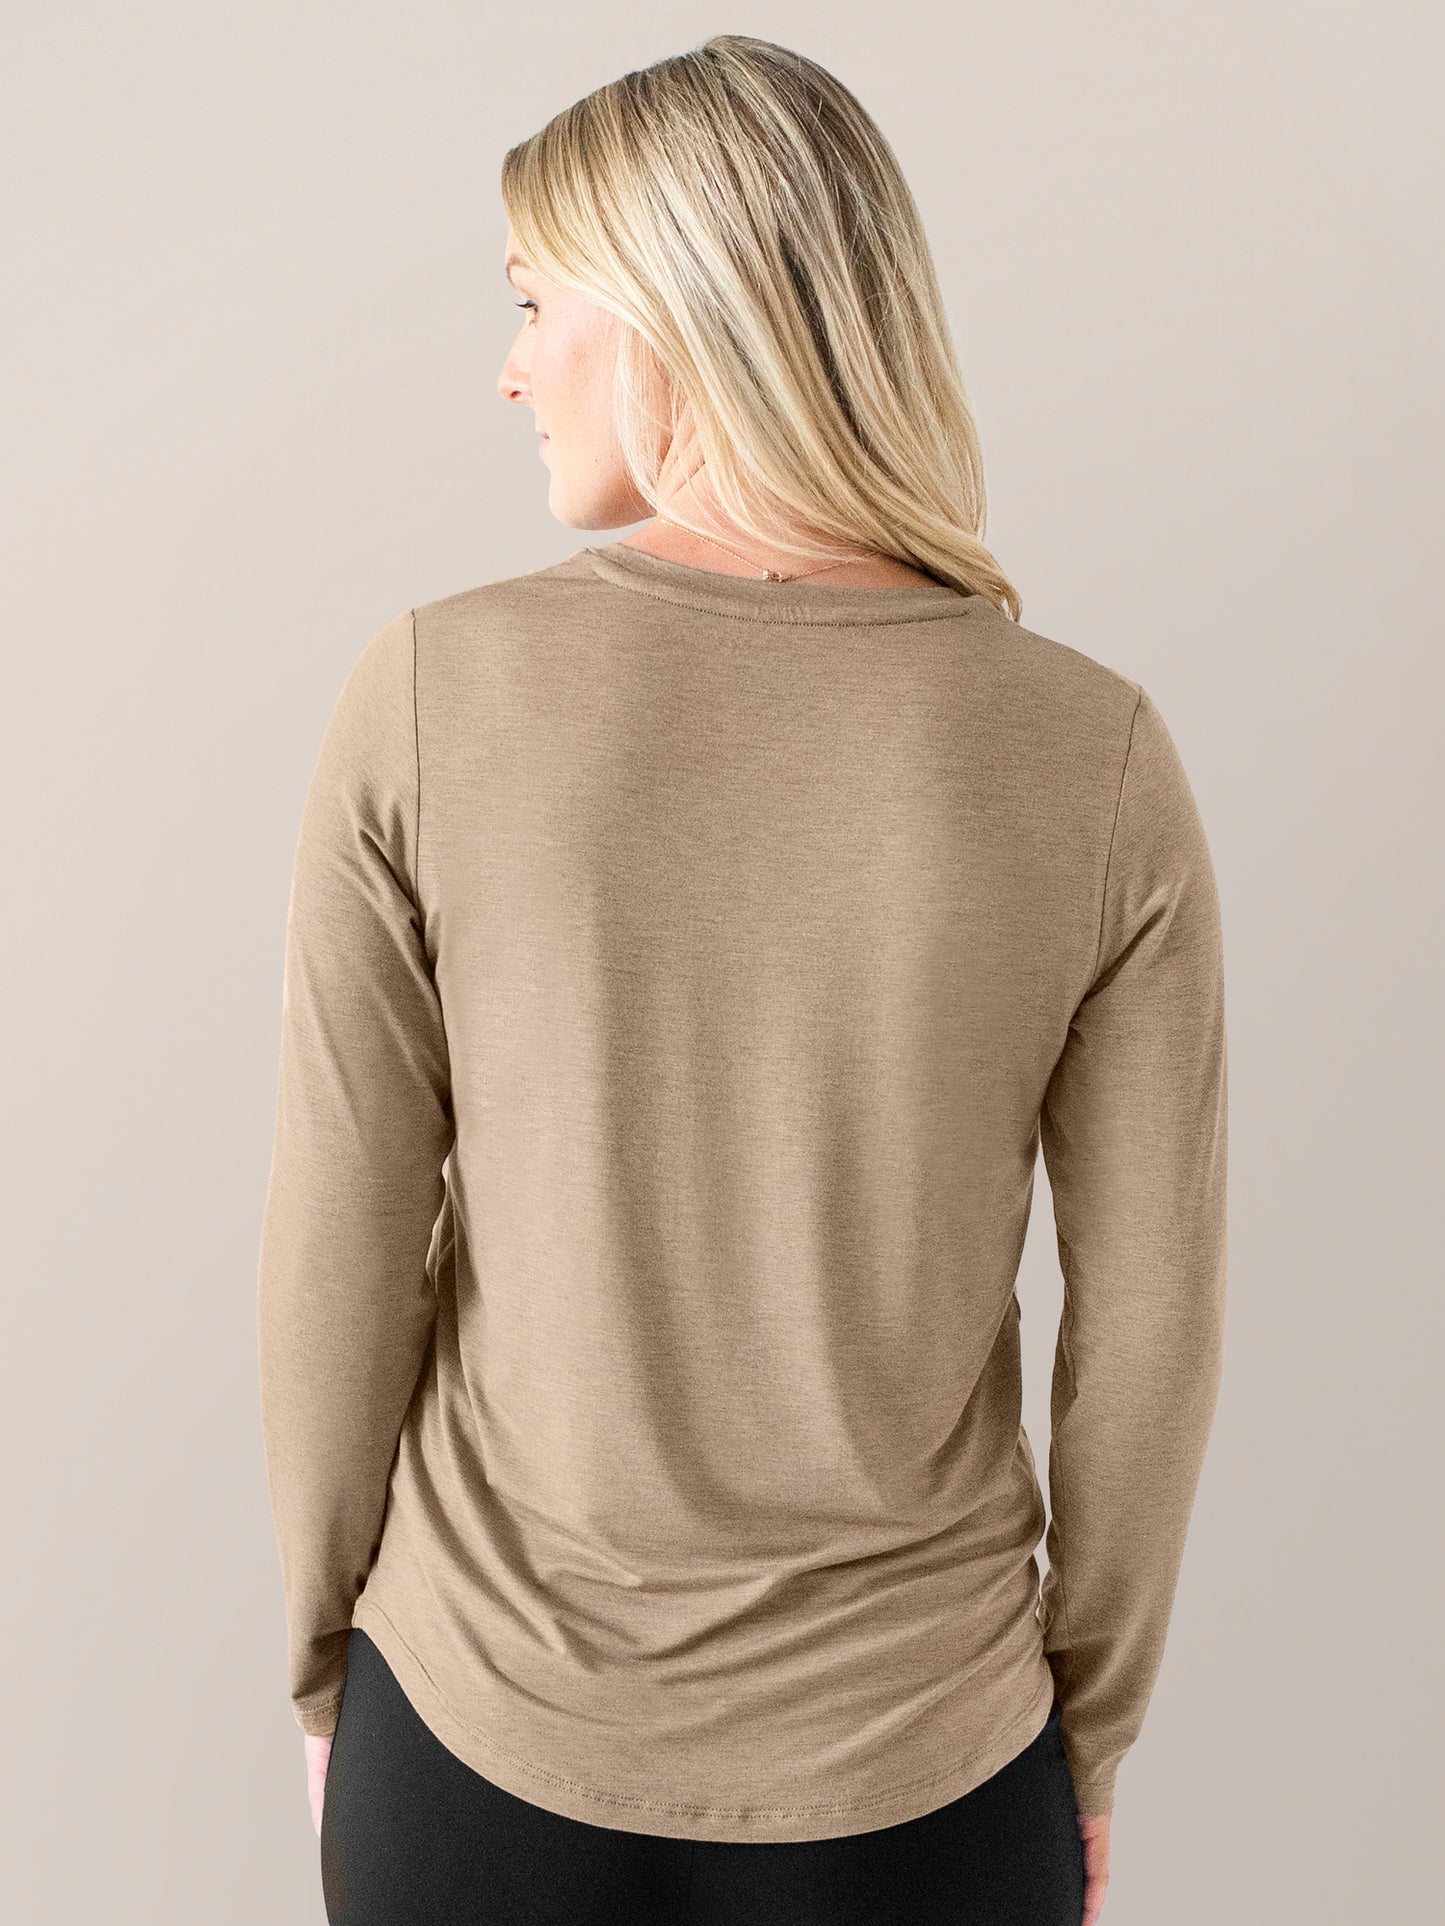 Back of a model wearing the Bamboo Maternity & Nursing Long Sleeve T-shirt in Wheat